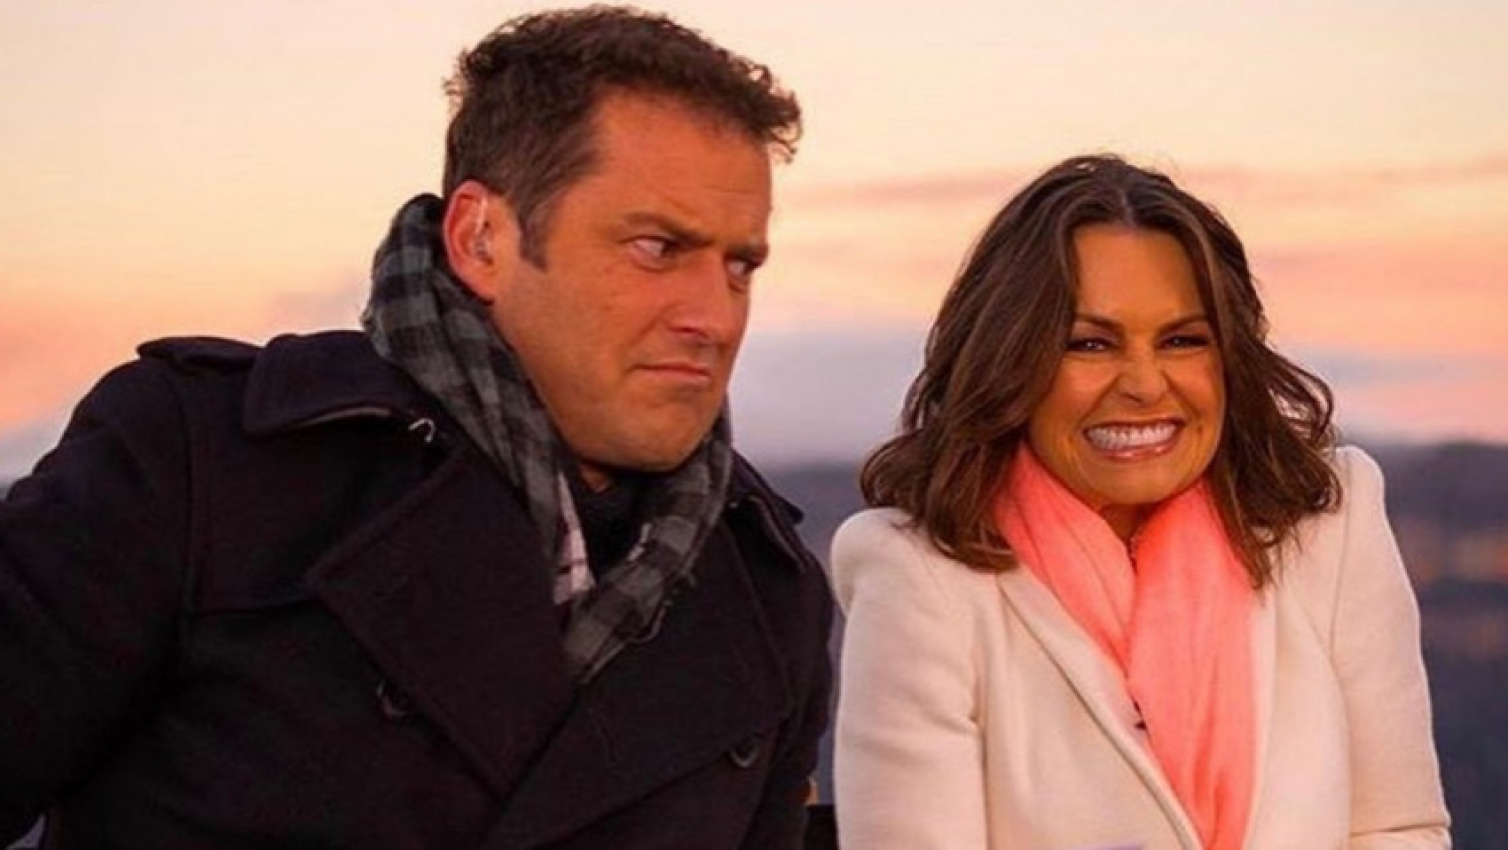 autos, cars, news, entertainment, morning shows, tv & radio, richard reid reveals karl stefanovic and lisa wilkinson had ‘tension’ before pay dispute